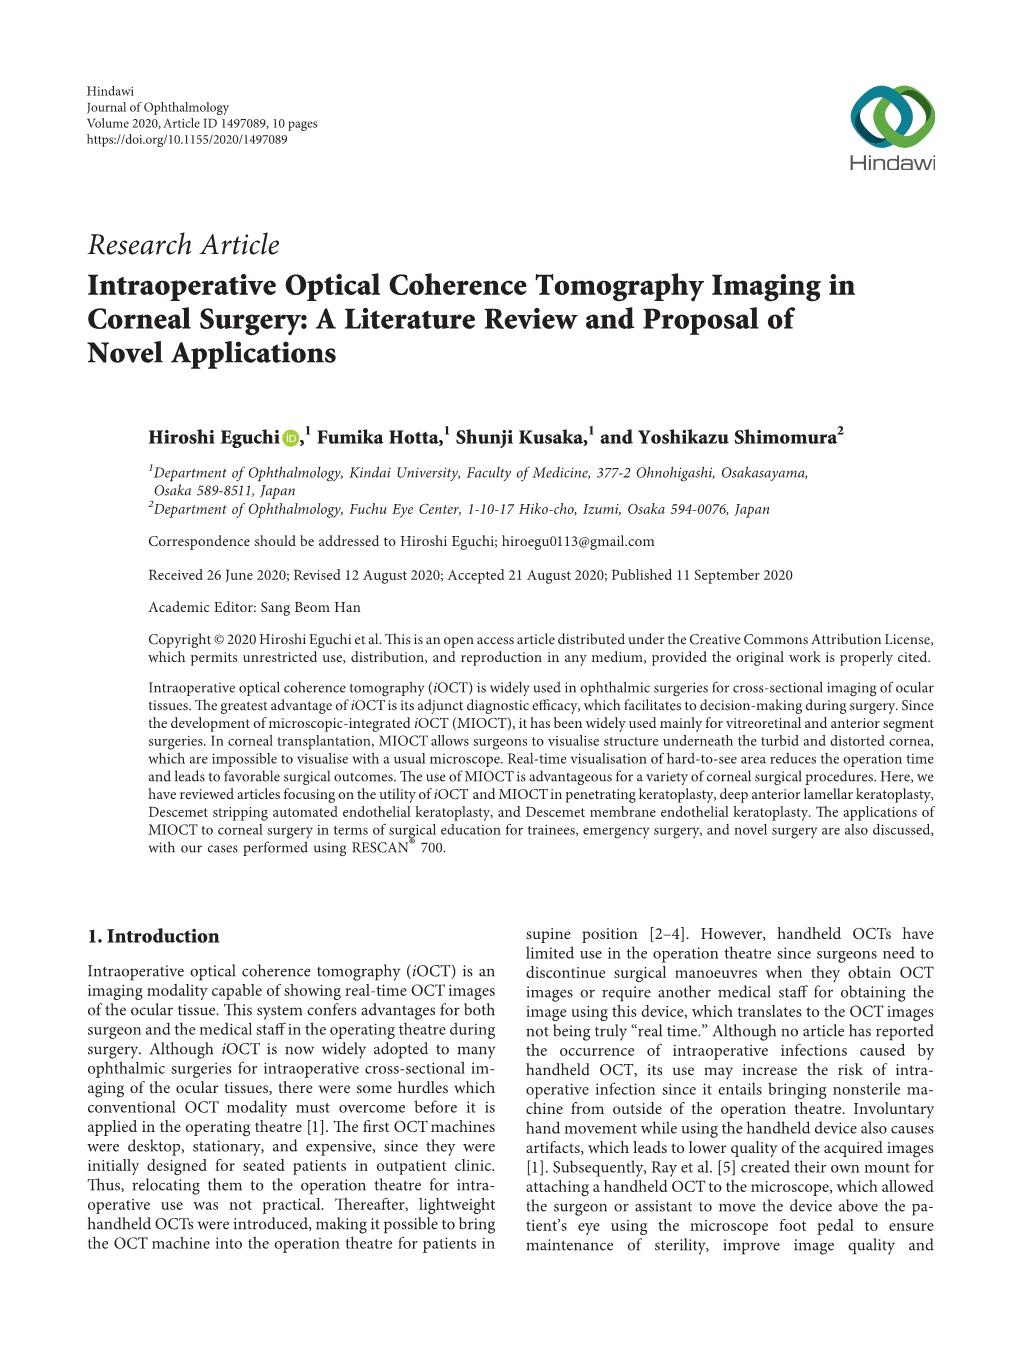 Intraoperative Optical Coherence Tomography Imaging in Corneal Surgery: a Literature Review and Proposal of Novel Applications